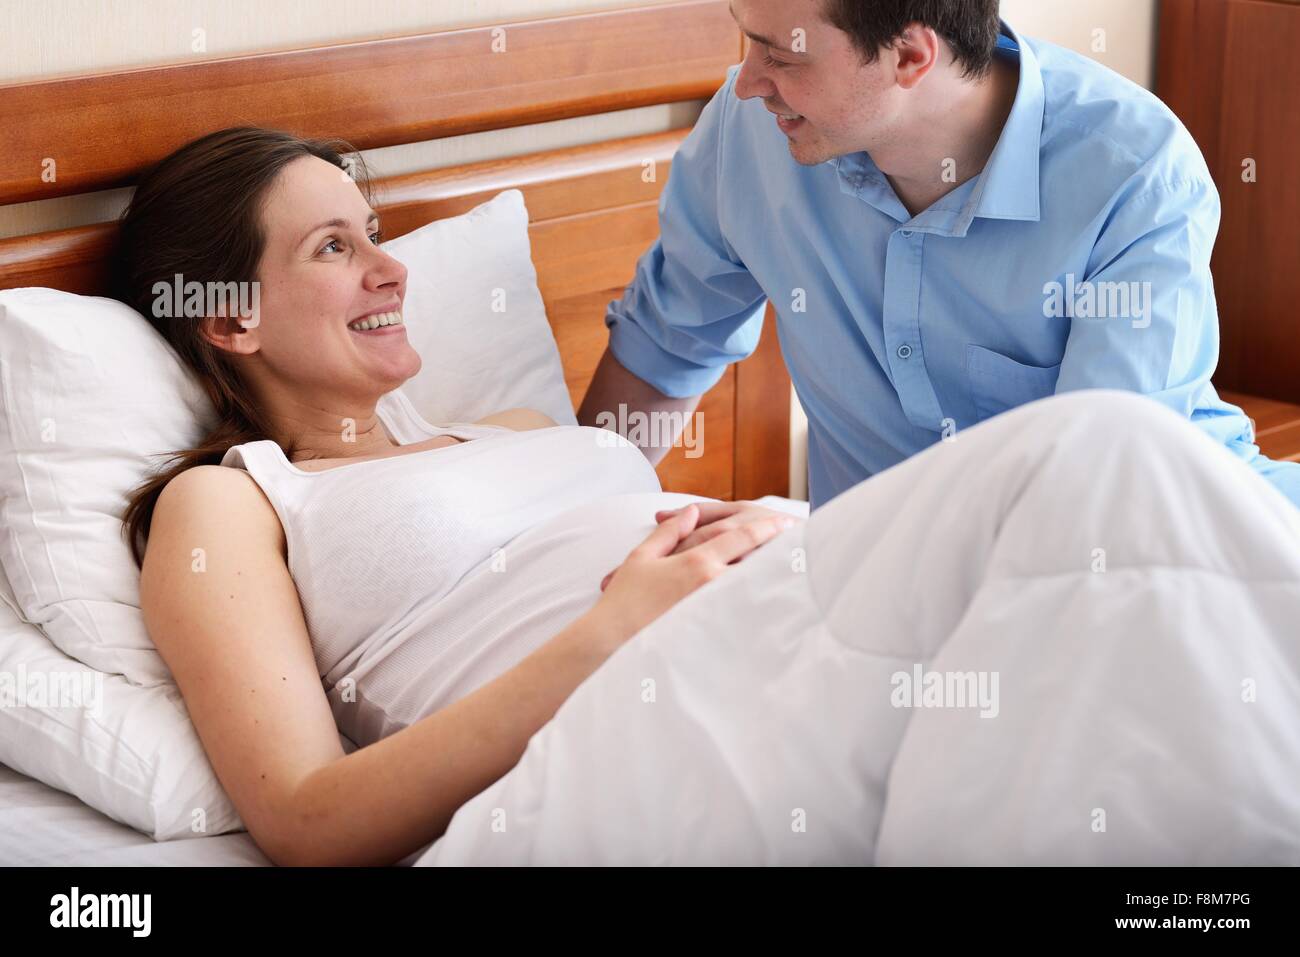 Pregnant woman lying in bed, husband sitting beside her Stock Photo